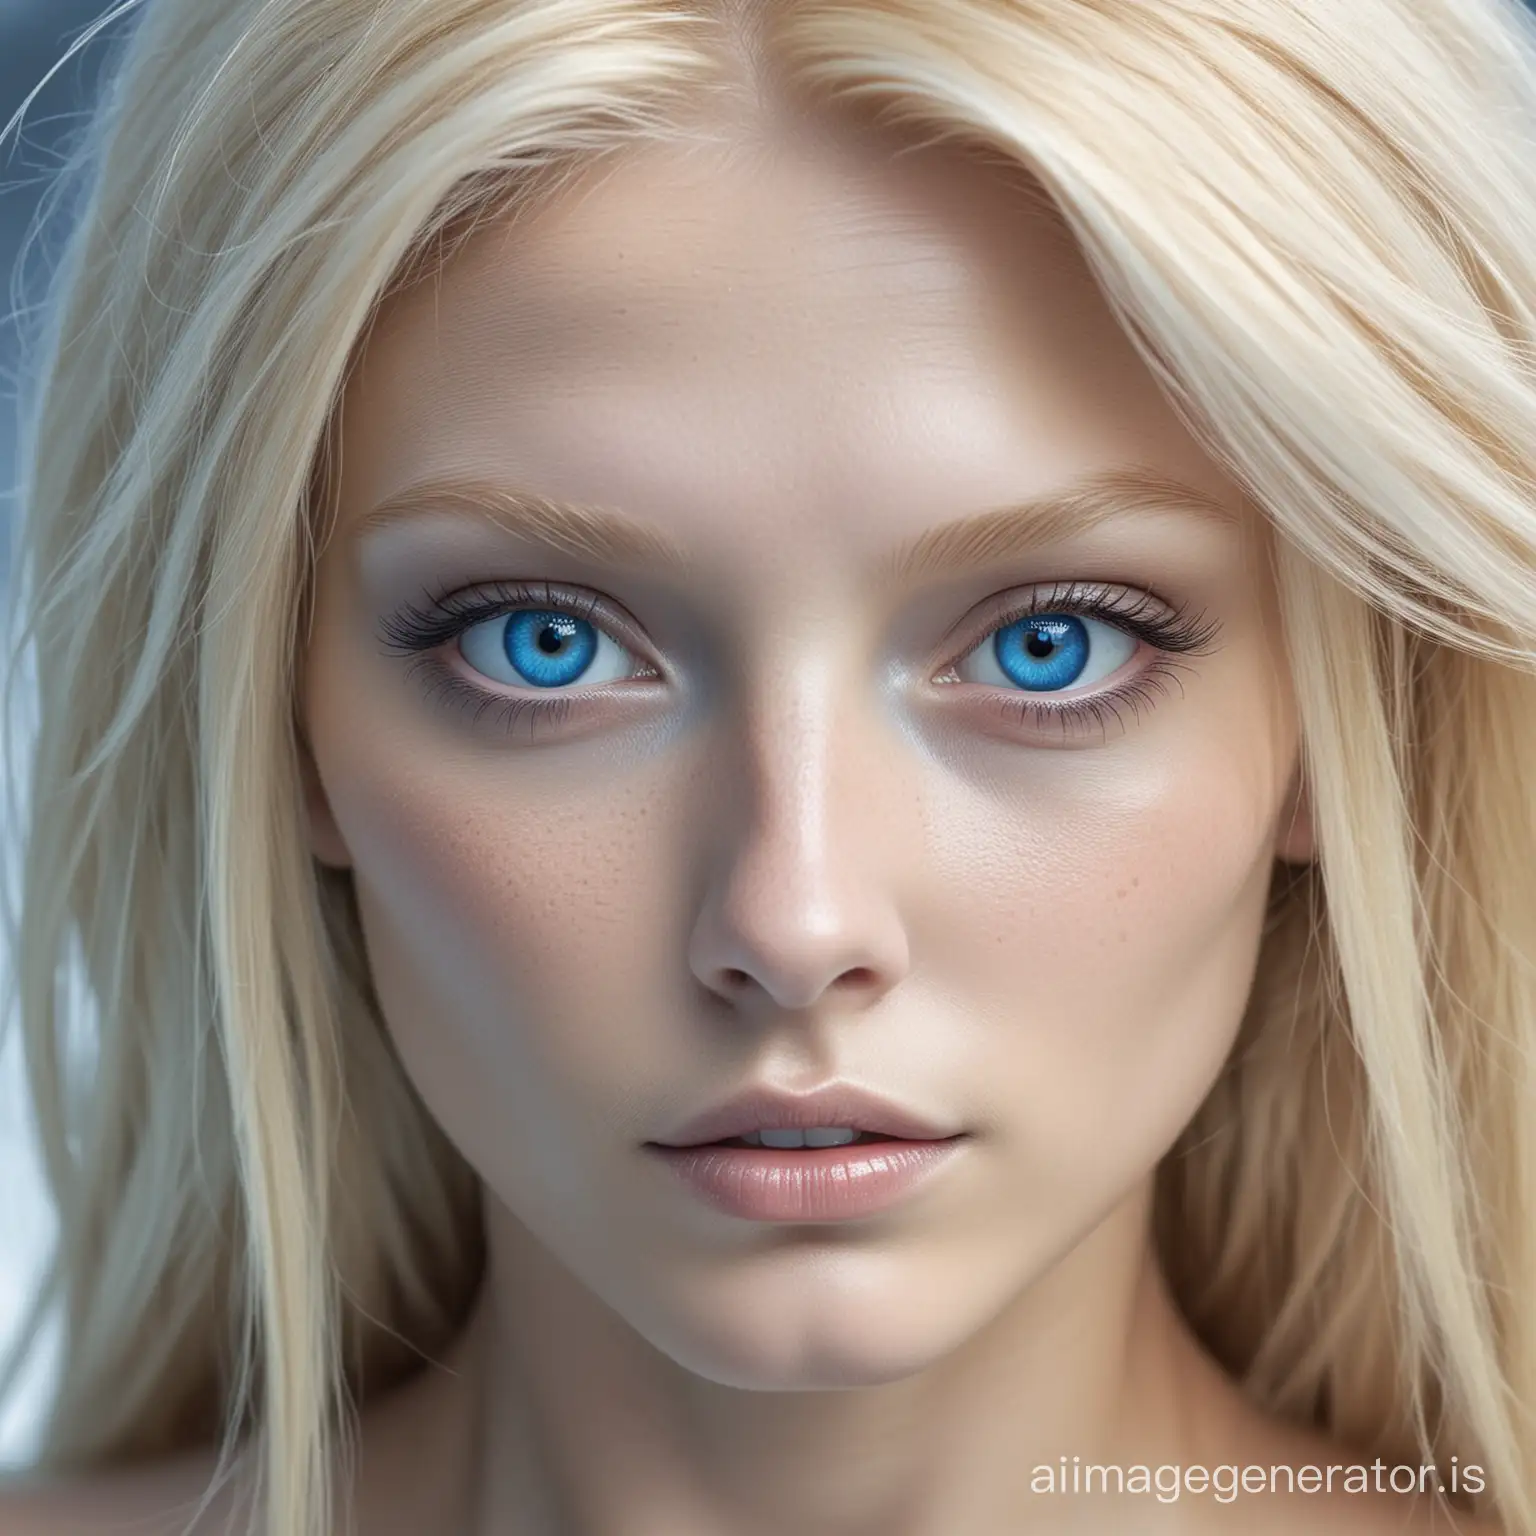 Mystical-Nordic-Aliens-with-Blonde-Hair-and-Bright-Blue-Eyes